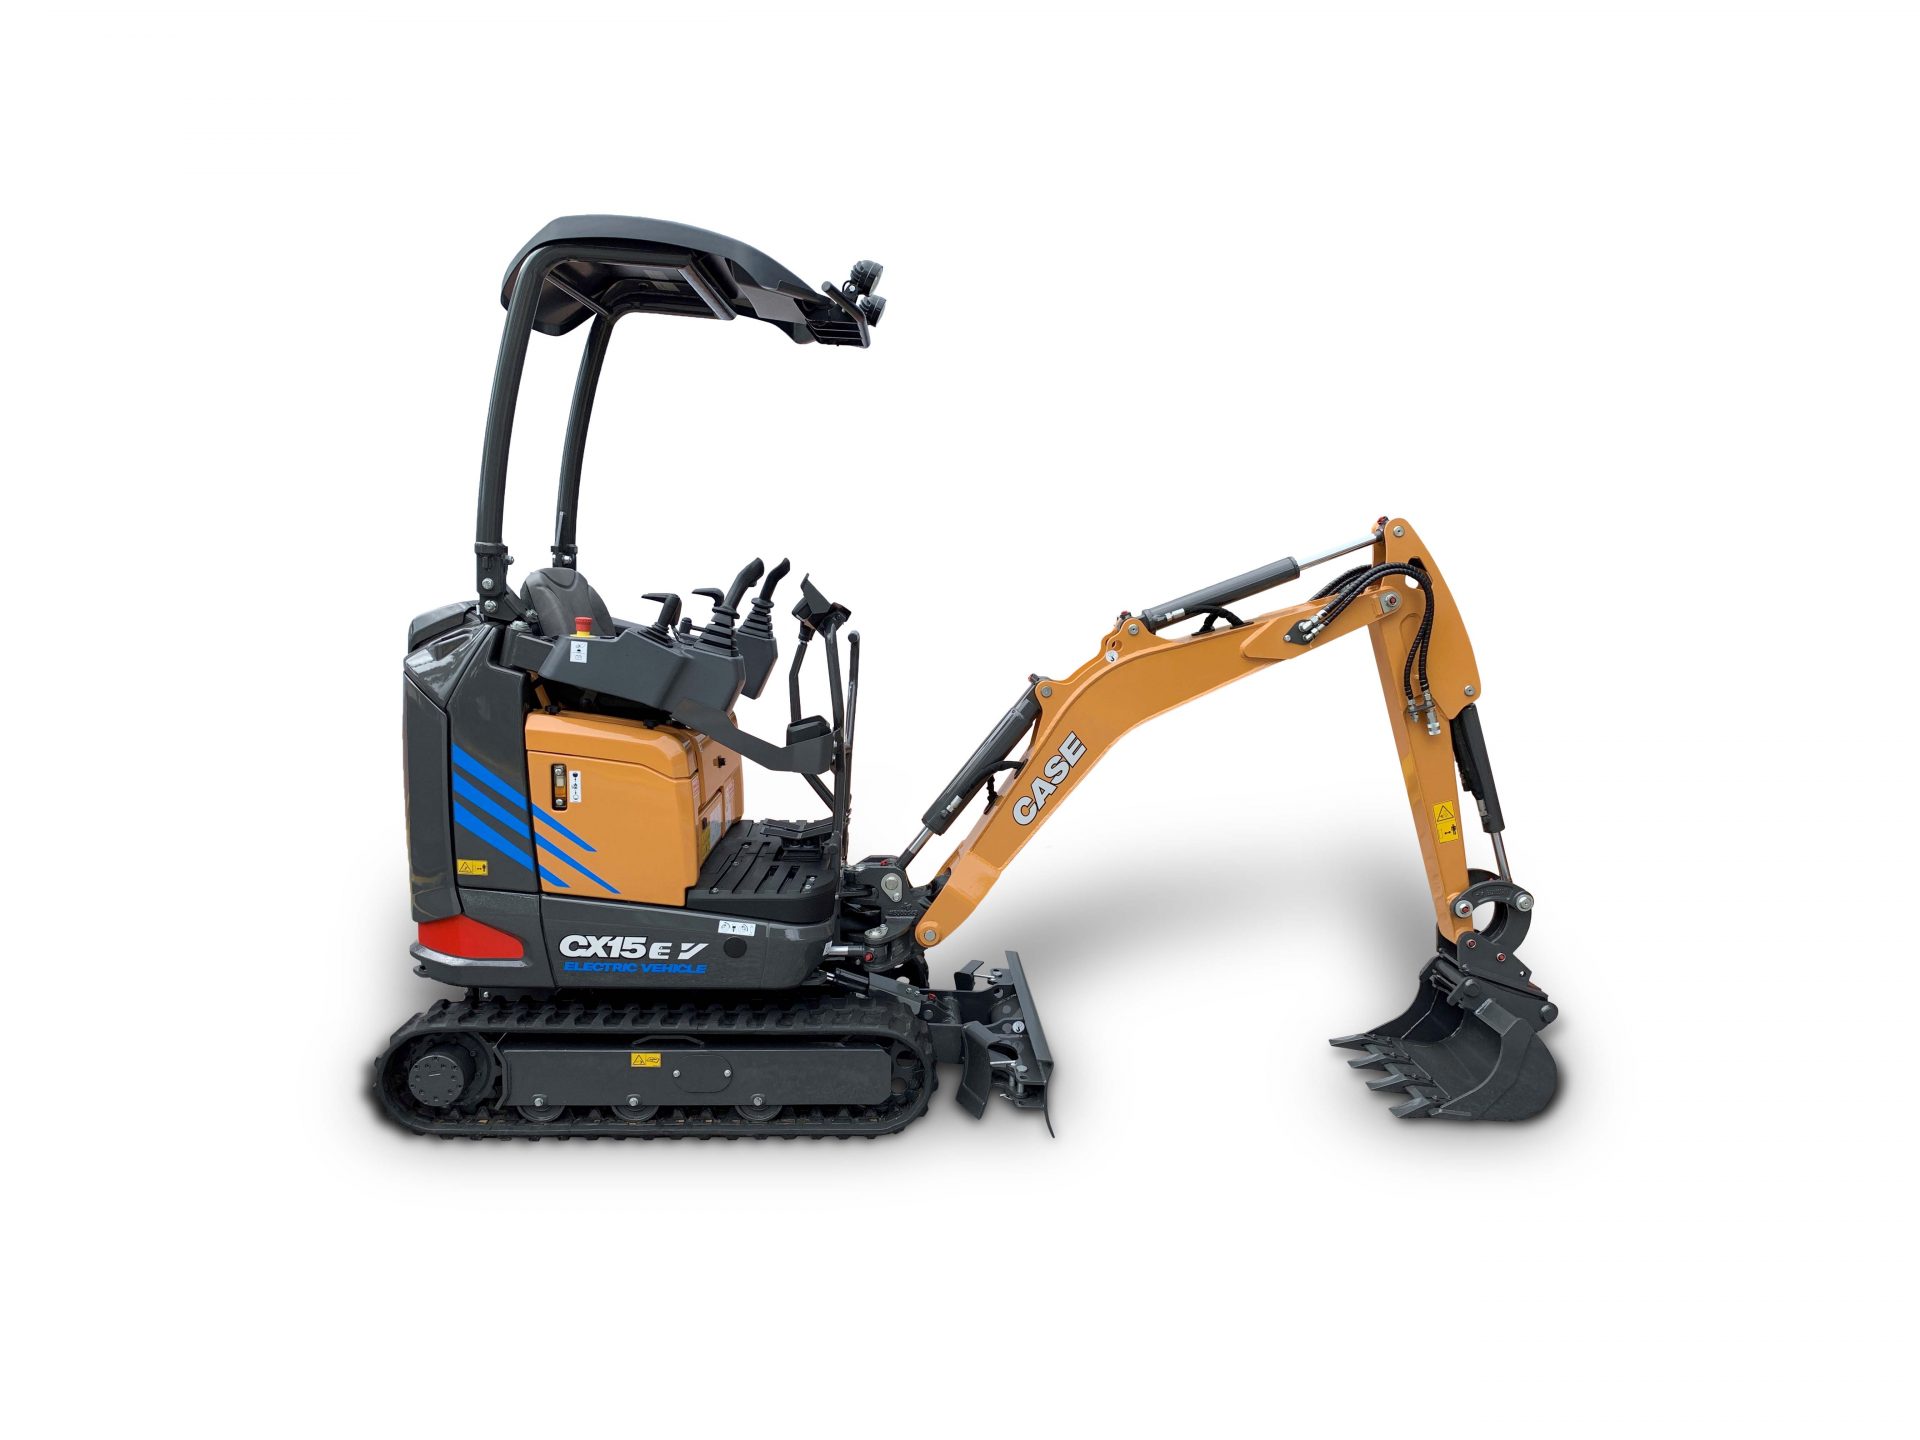 Product photo of CASE's upcoming CX15 EV battery electric mini excavator.